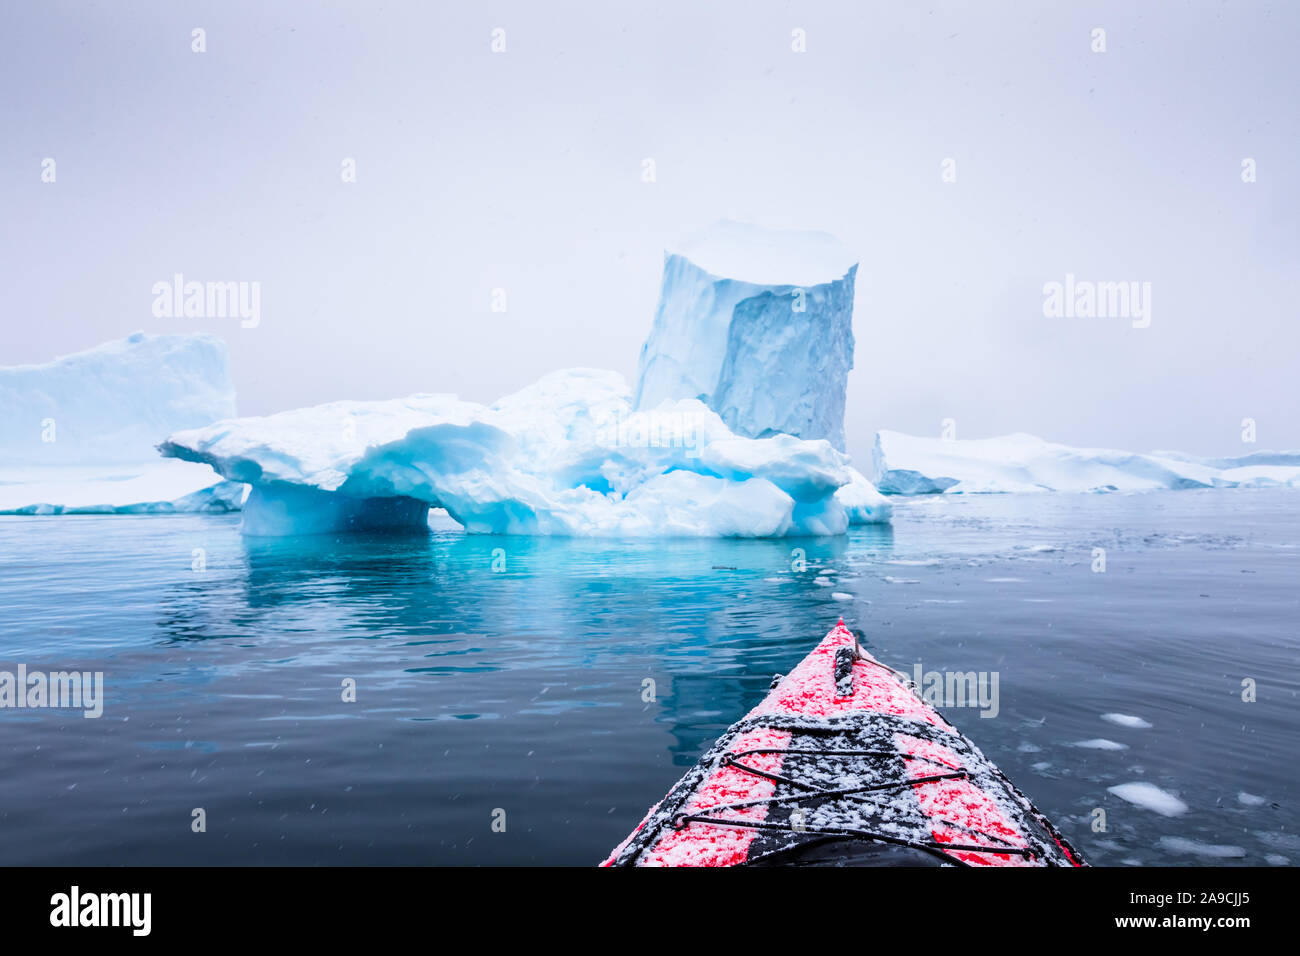 Kayaking between icebergs on a red kayak in Antarctica, POV (point of view) photo with frozen white landscape and blue ice, amazing scene in Antarctic Stock Photo